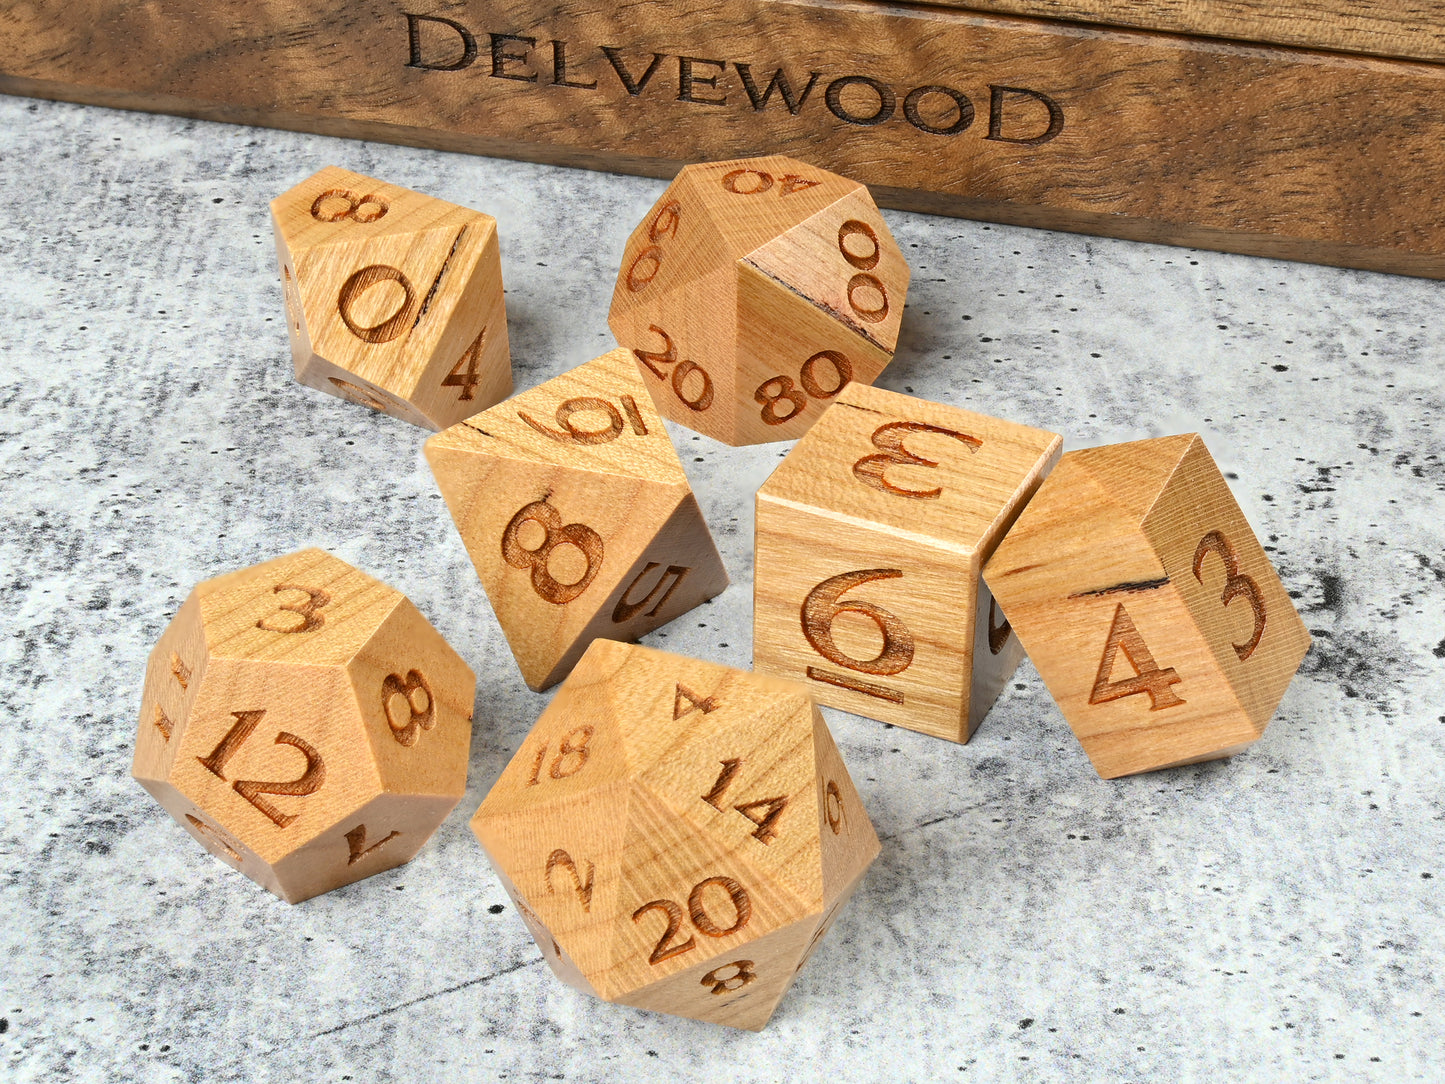 Cherry wood dice set for dnd rpg tabletop gaming in front of Delvewood delver's kit dice box.